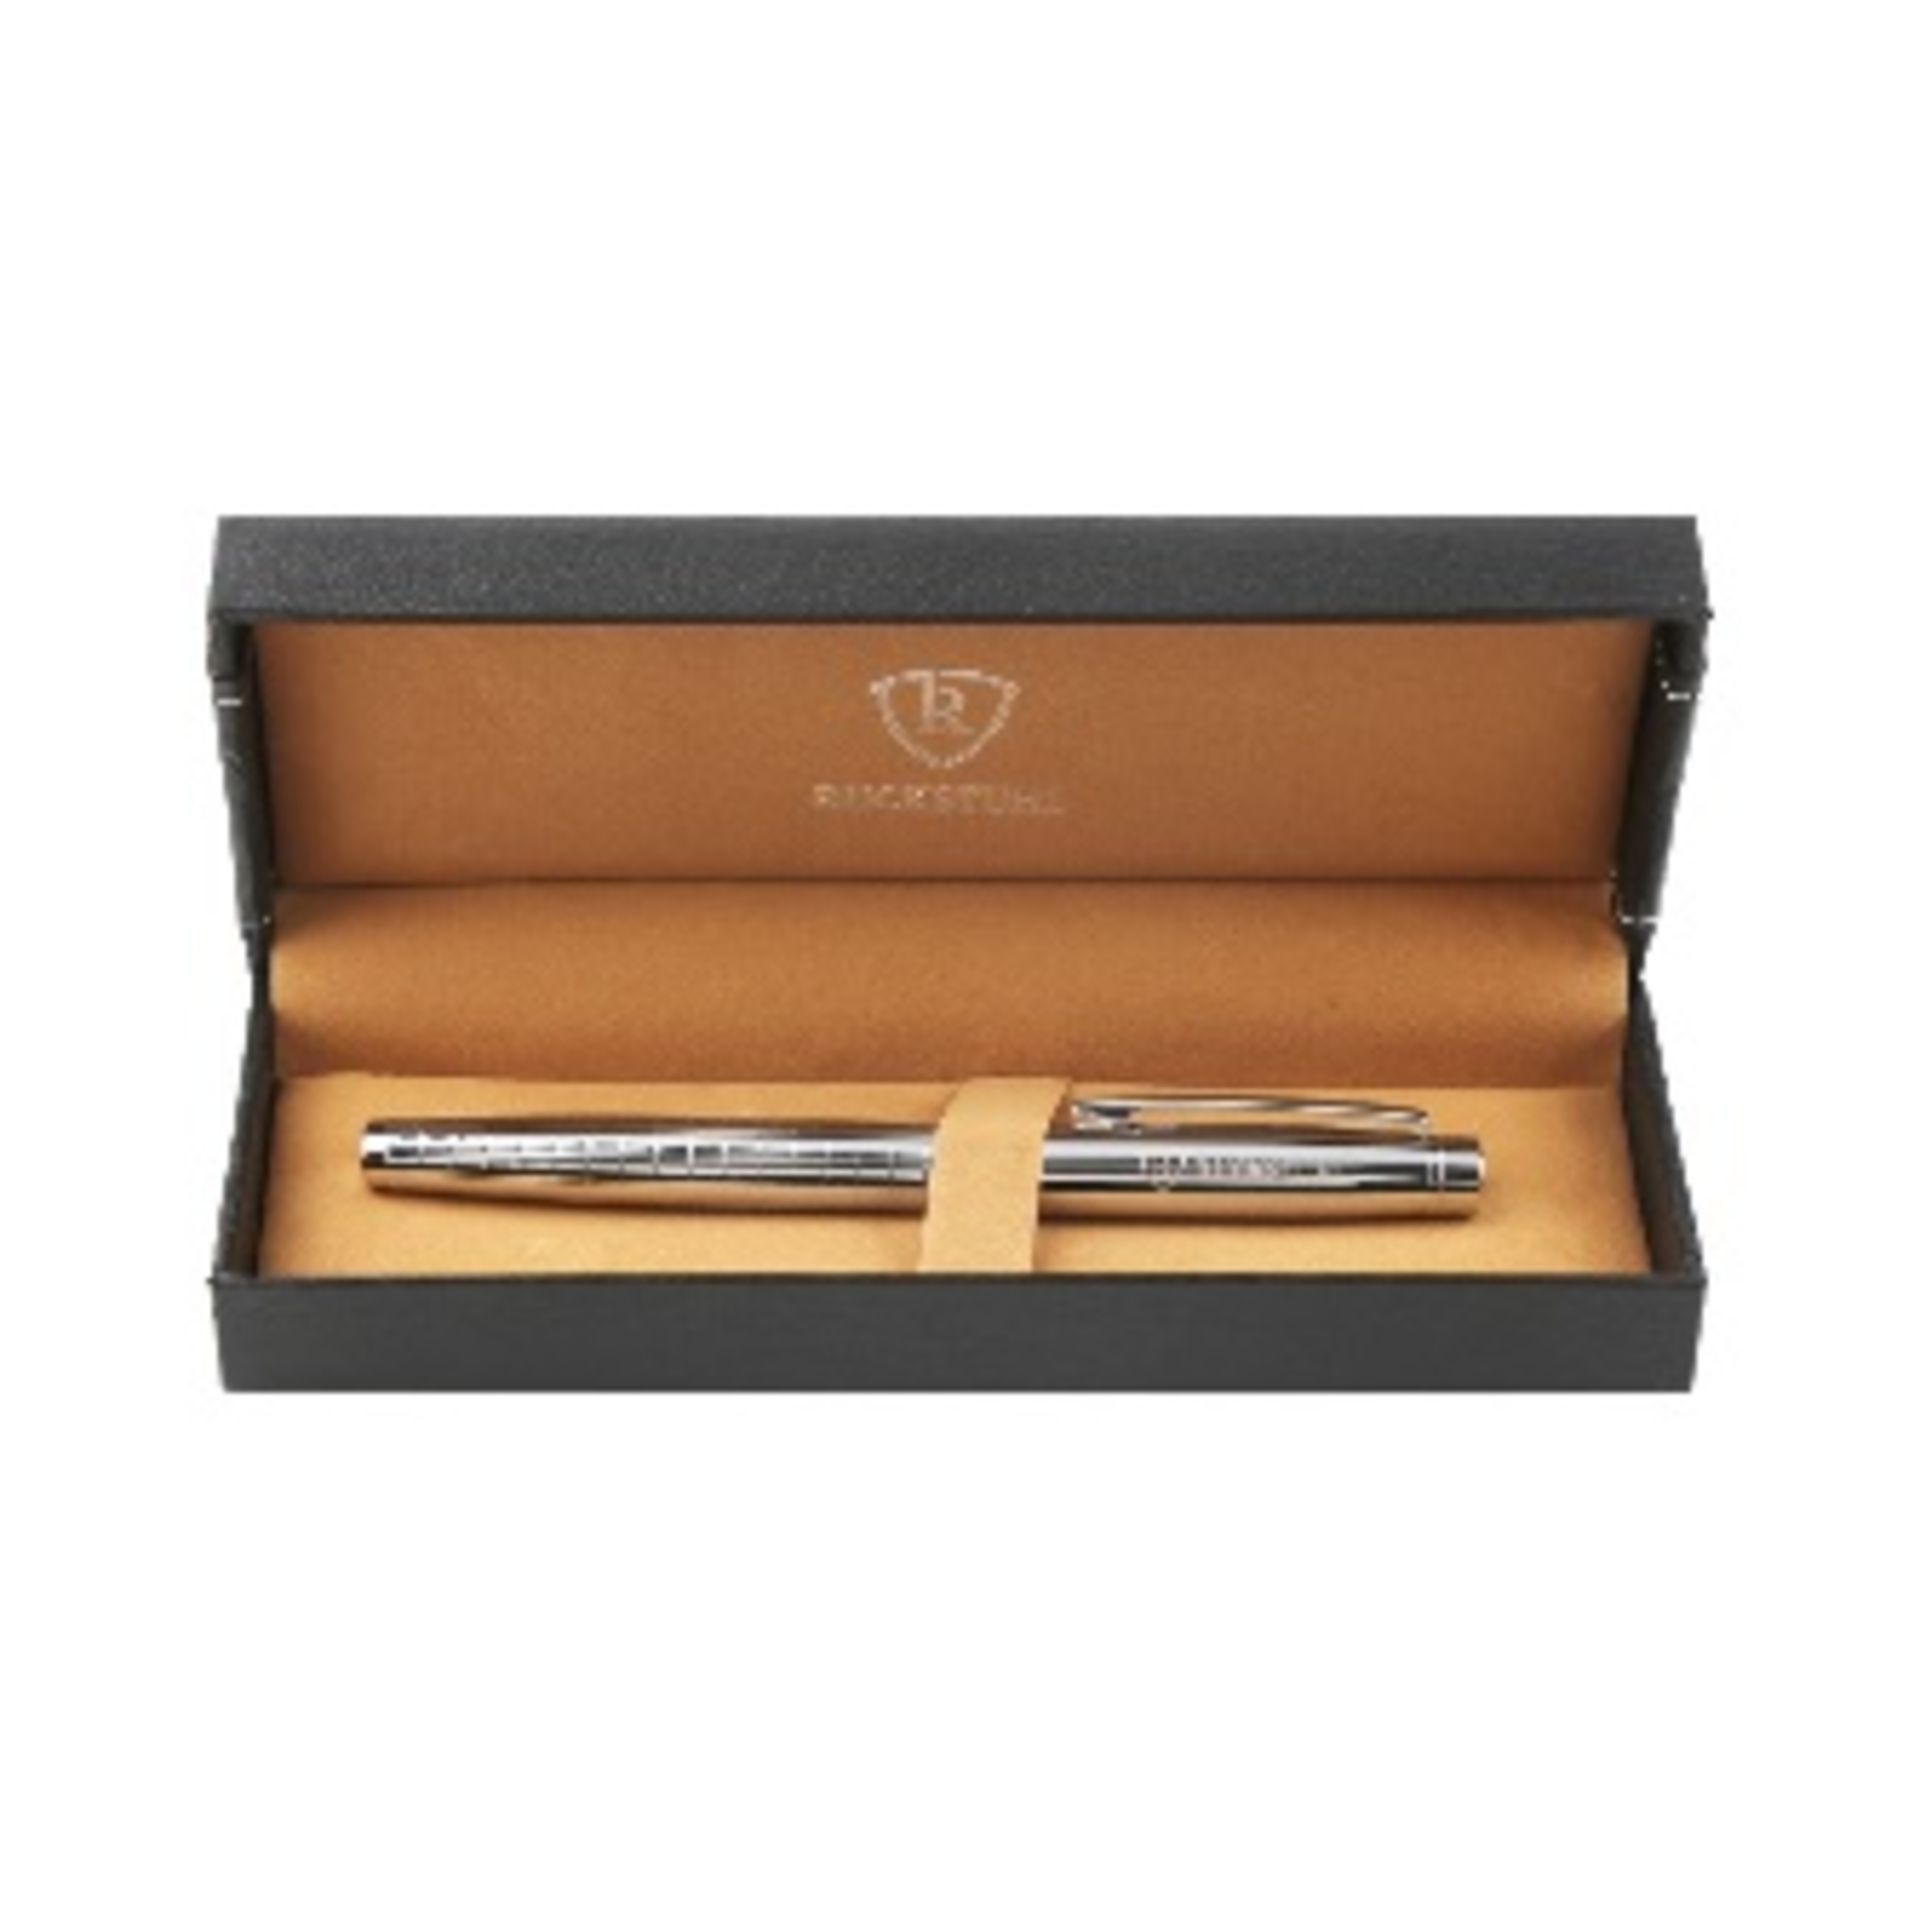 TWO RUCKSTUHL STAINLESS STEEL BALL POINT LIDDED PENS IN GIFT BOXES - Image 3 of 5